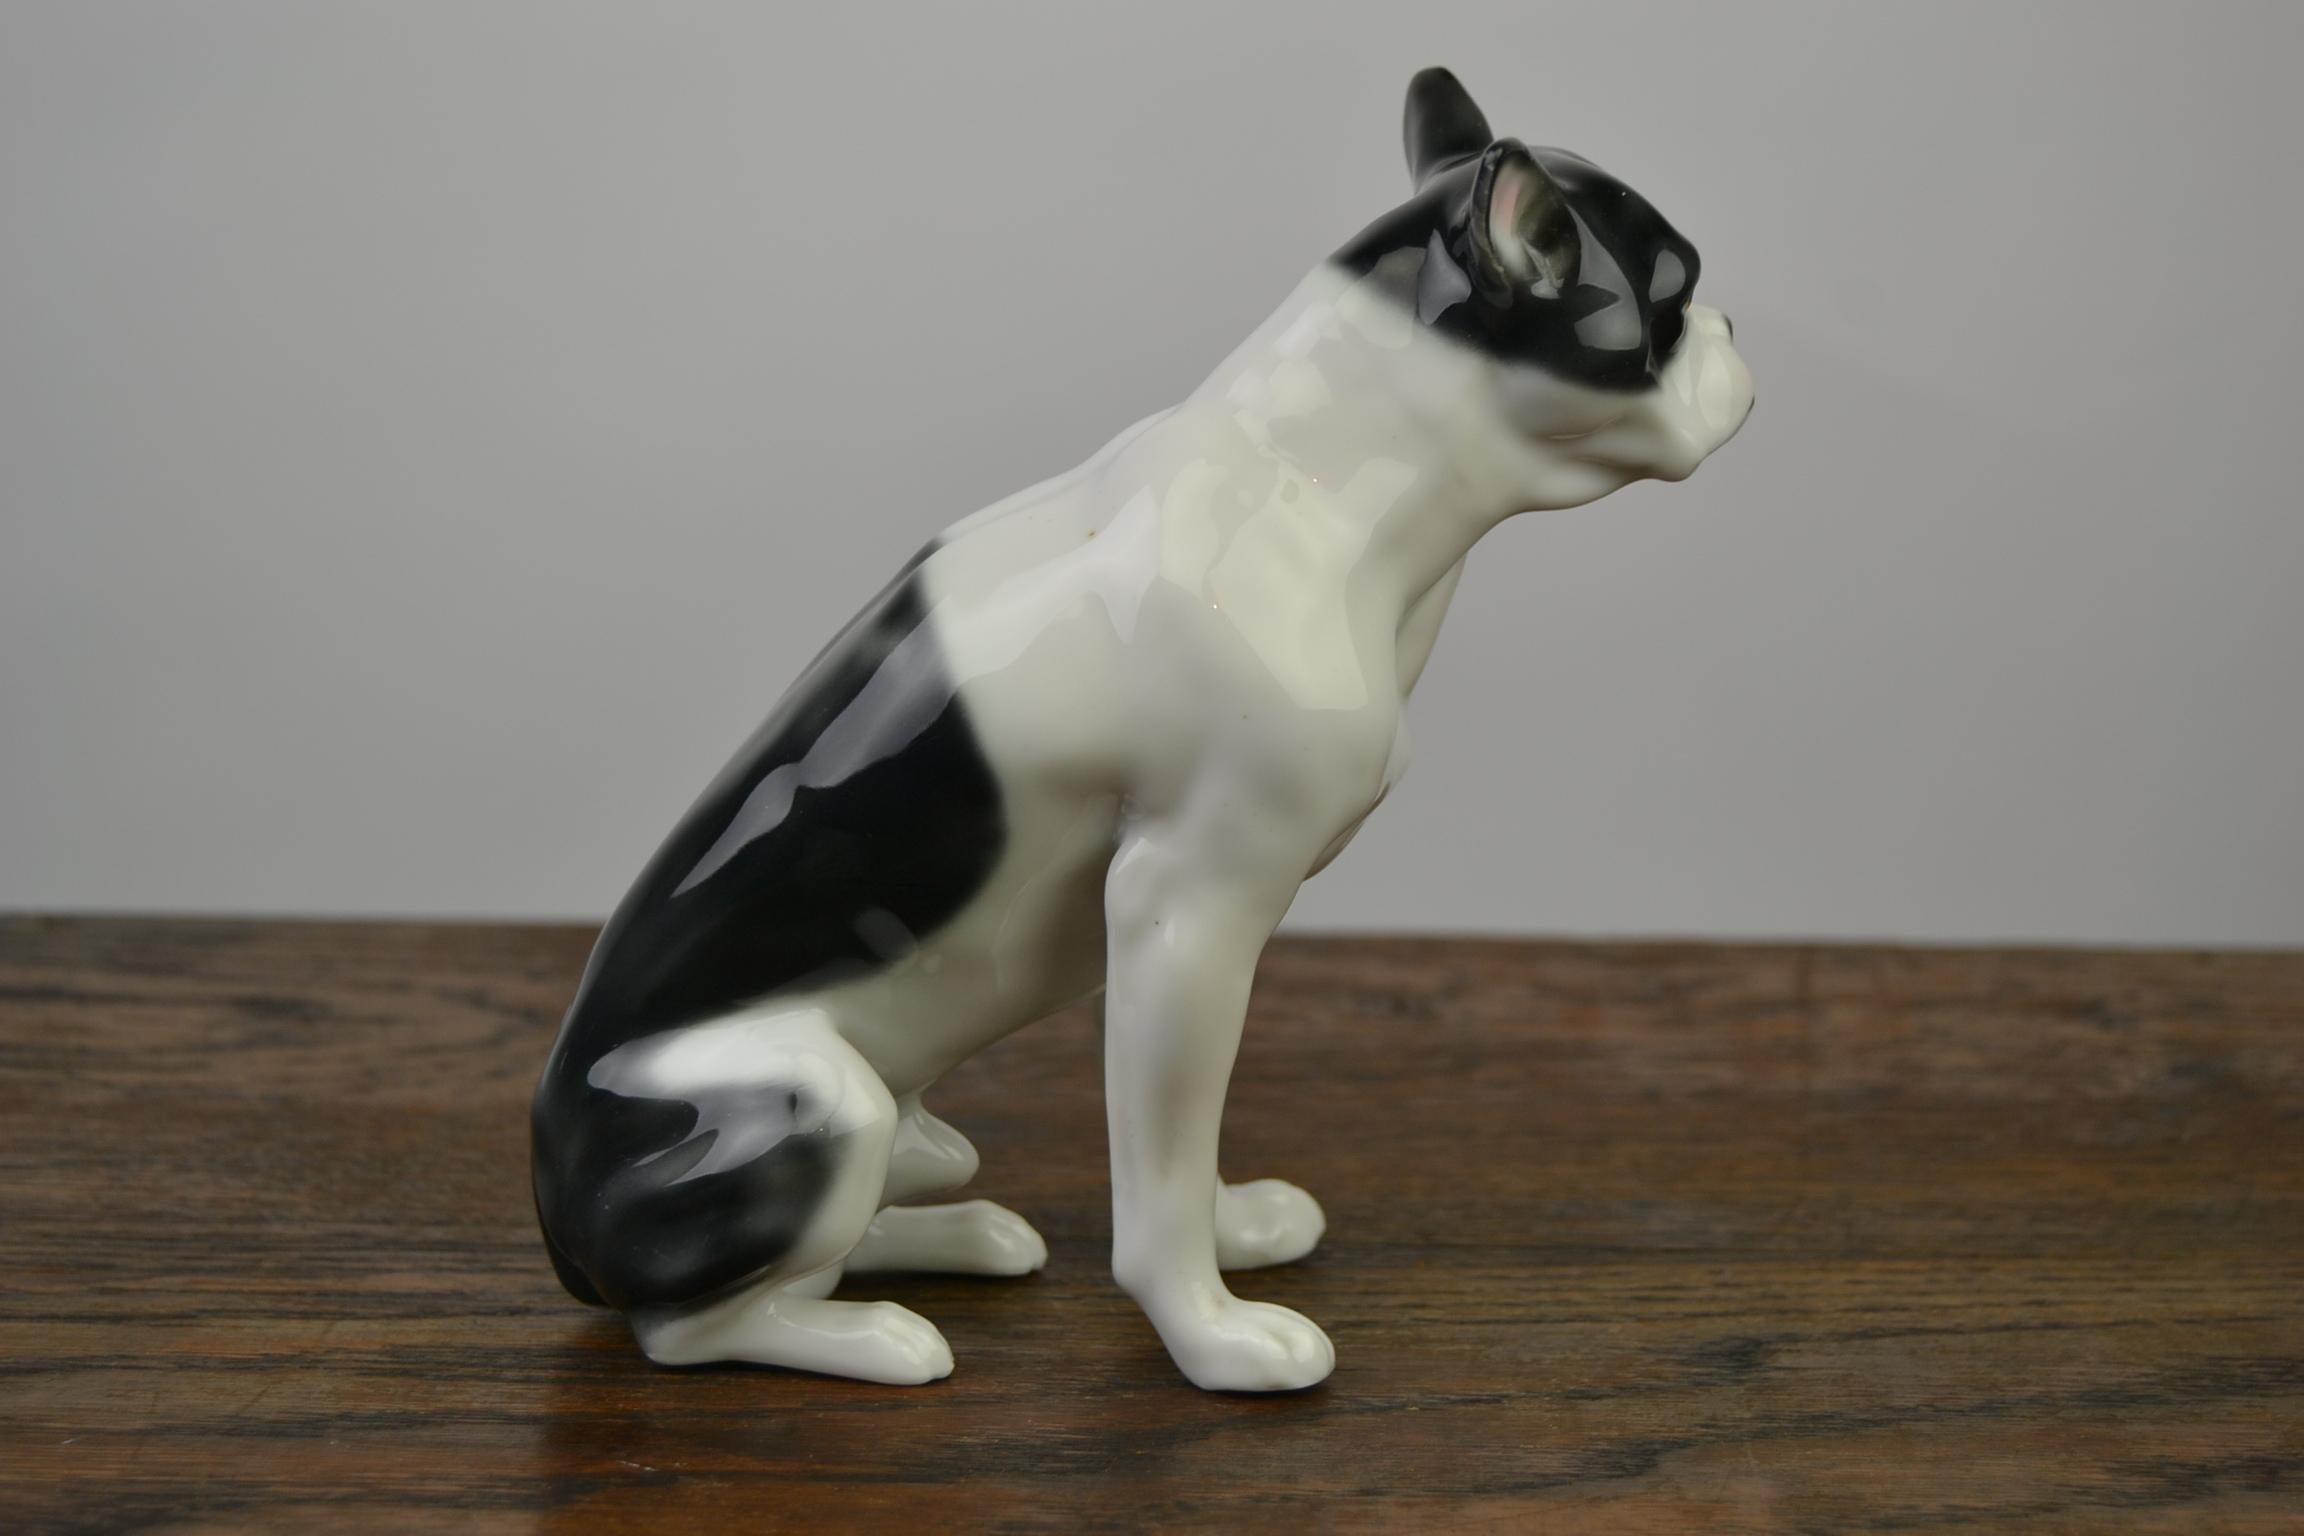 Art Deco Porcelain French Bulldog Figurine by Pfeffer, Germany, Early 20th Century For Sale